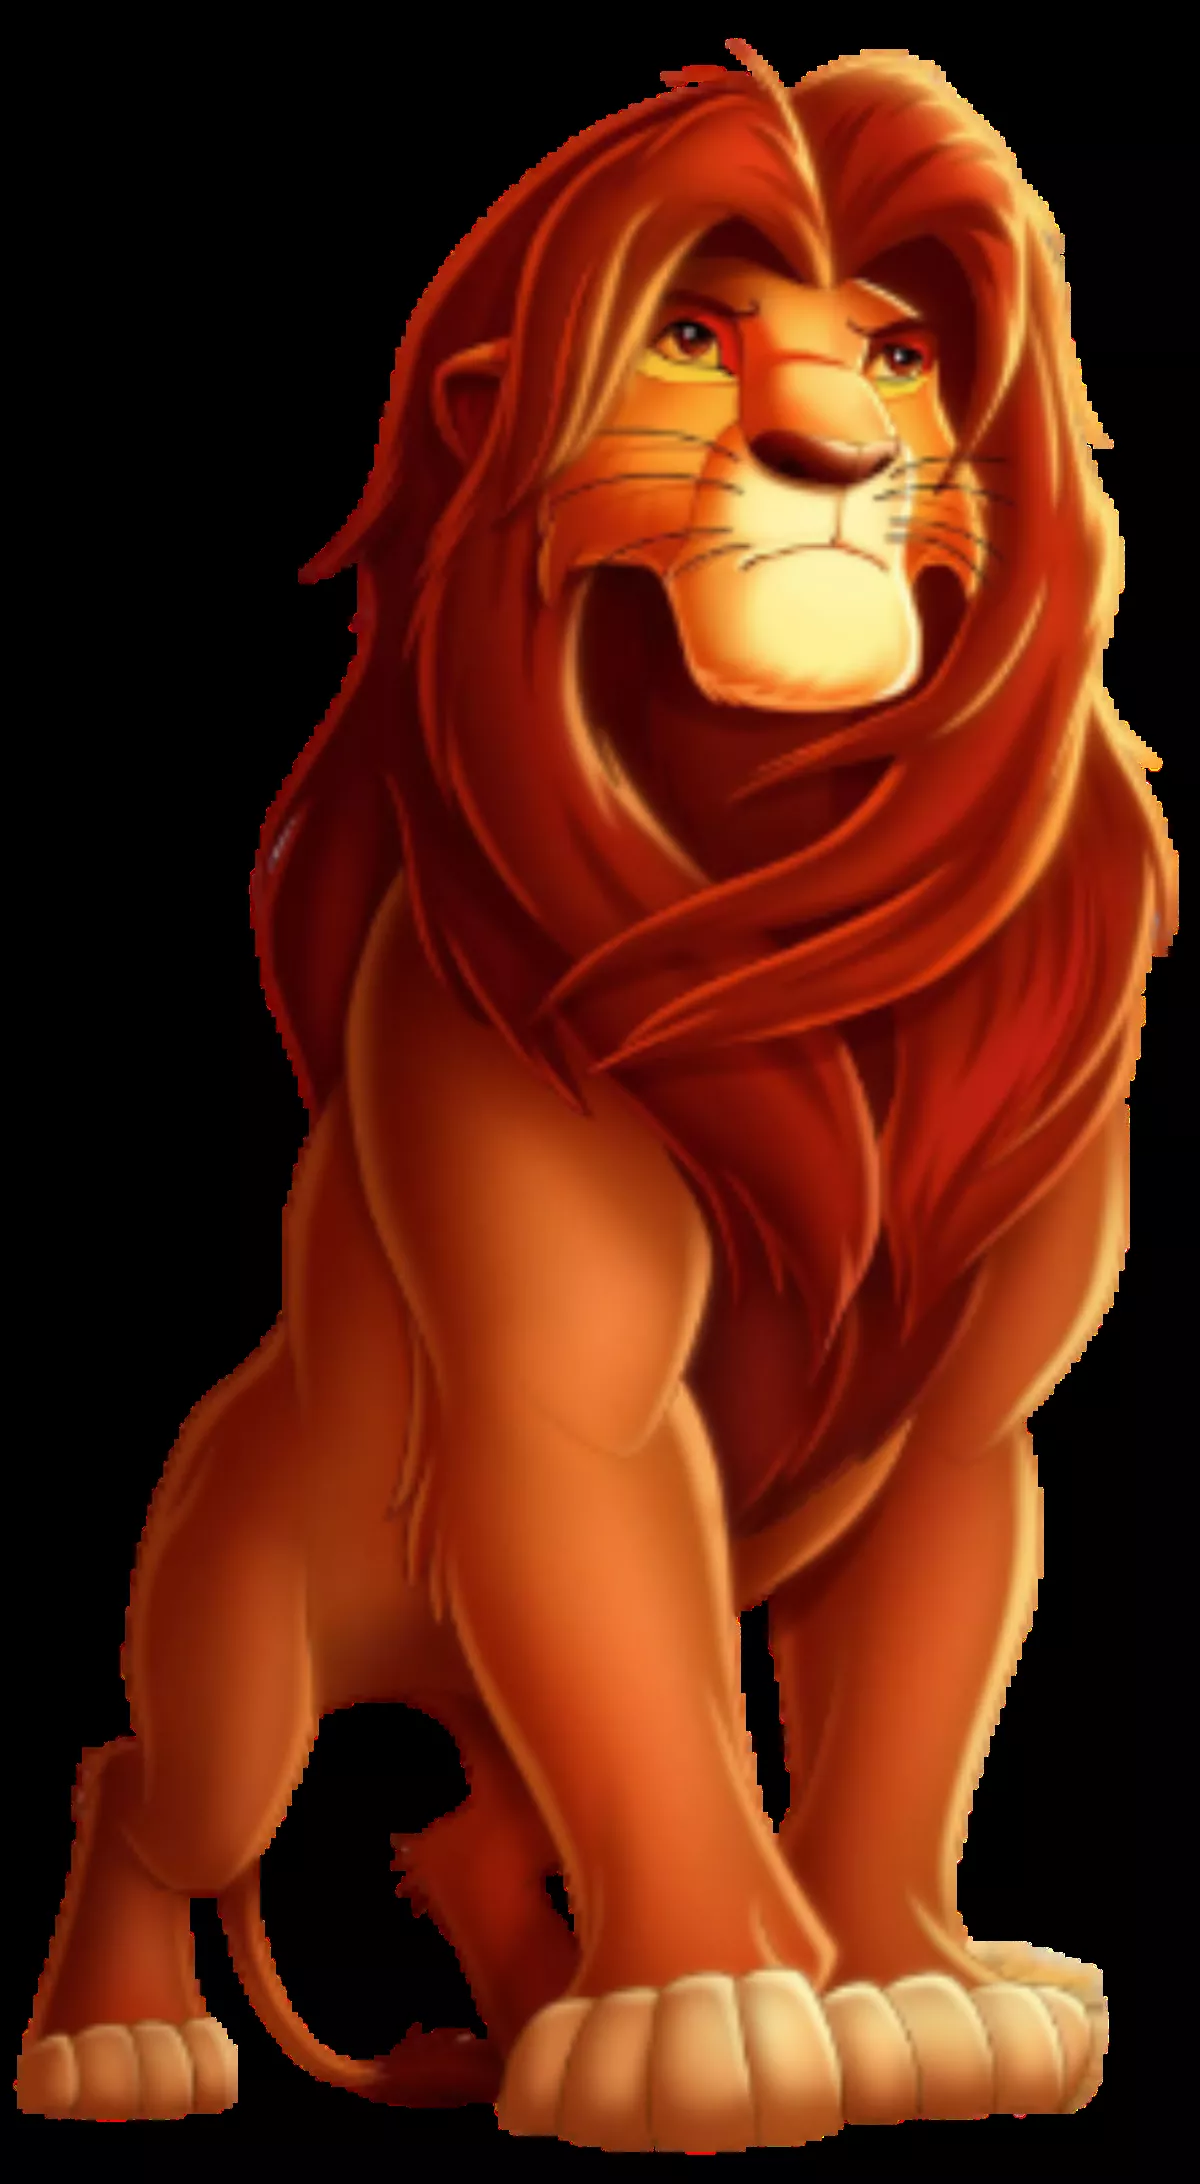 26 Facts About King Simba | FactSnippet